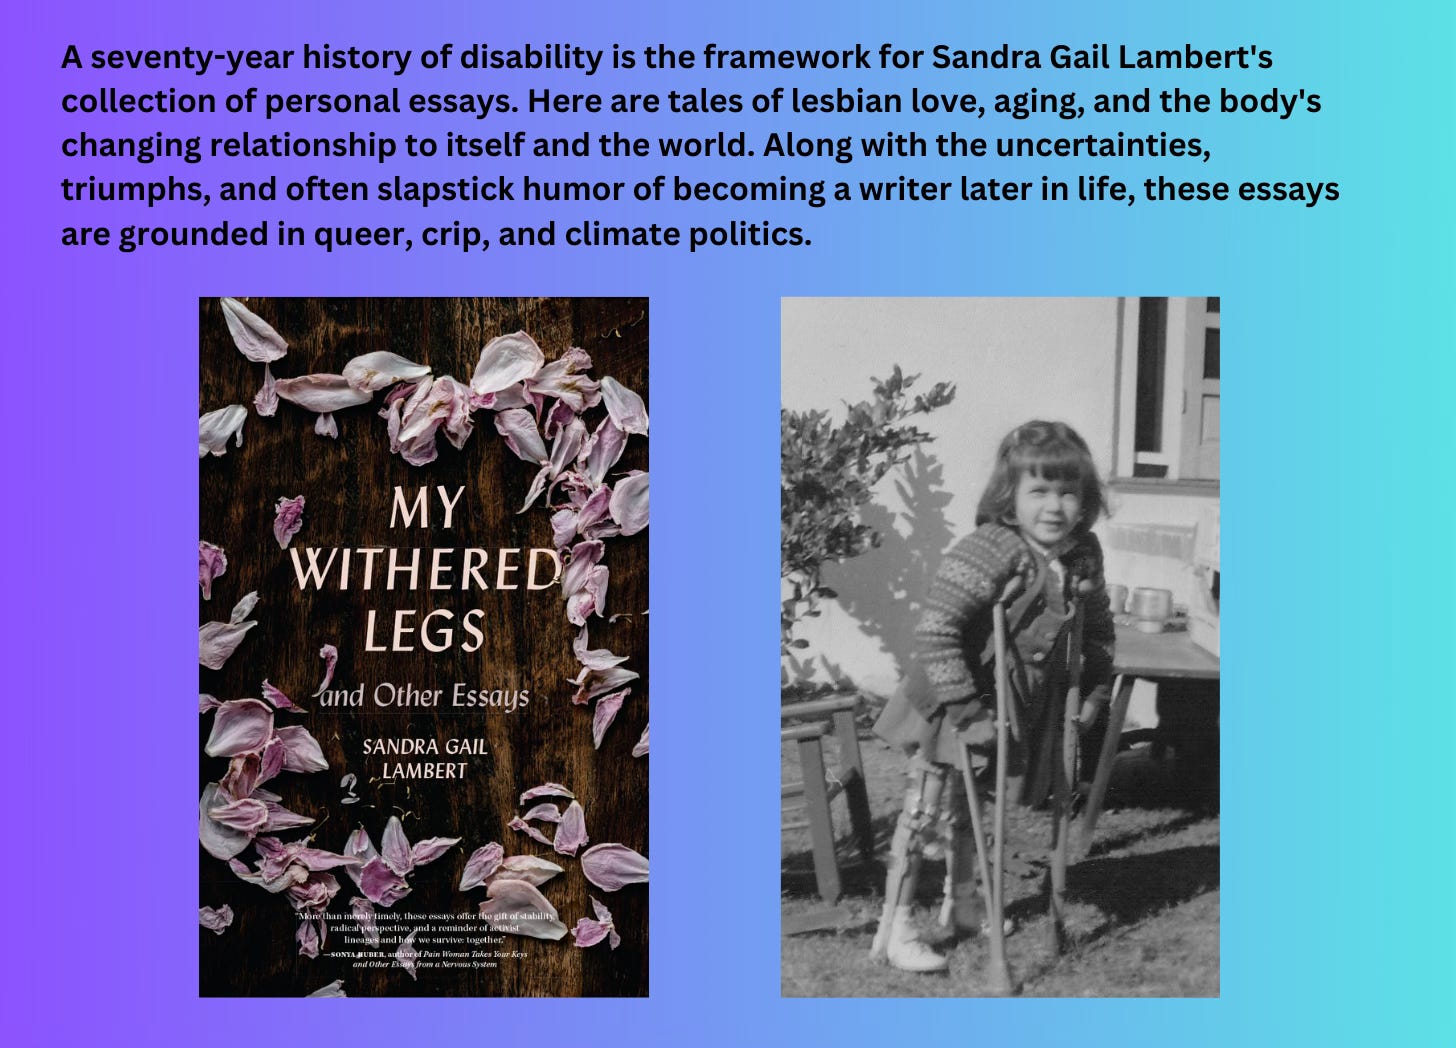 And image of a book cover (My Withered Legs and Other Essays by Sandra Gail Lambert) and beside it a photograph of a 4 y/o white girl using leg braces with wooden crutches tucked up into her armpits. The text says above says "A seventy year history of disability is the framework for Sandra Gail Lambert's collection of personal essays. 